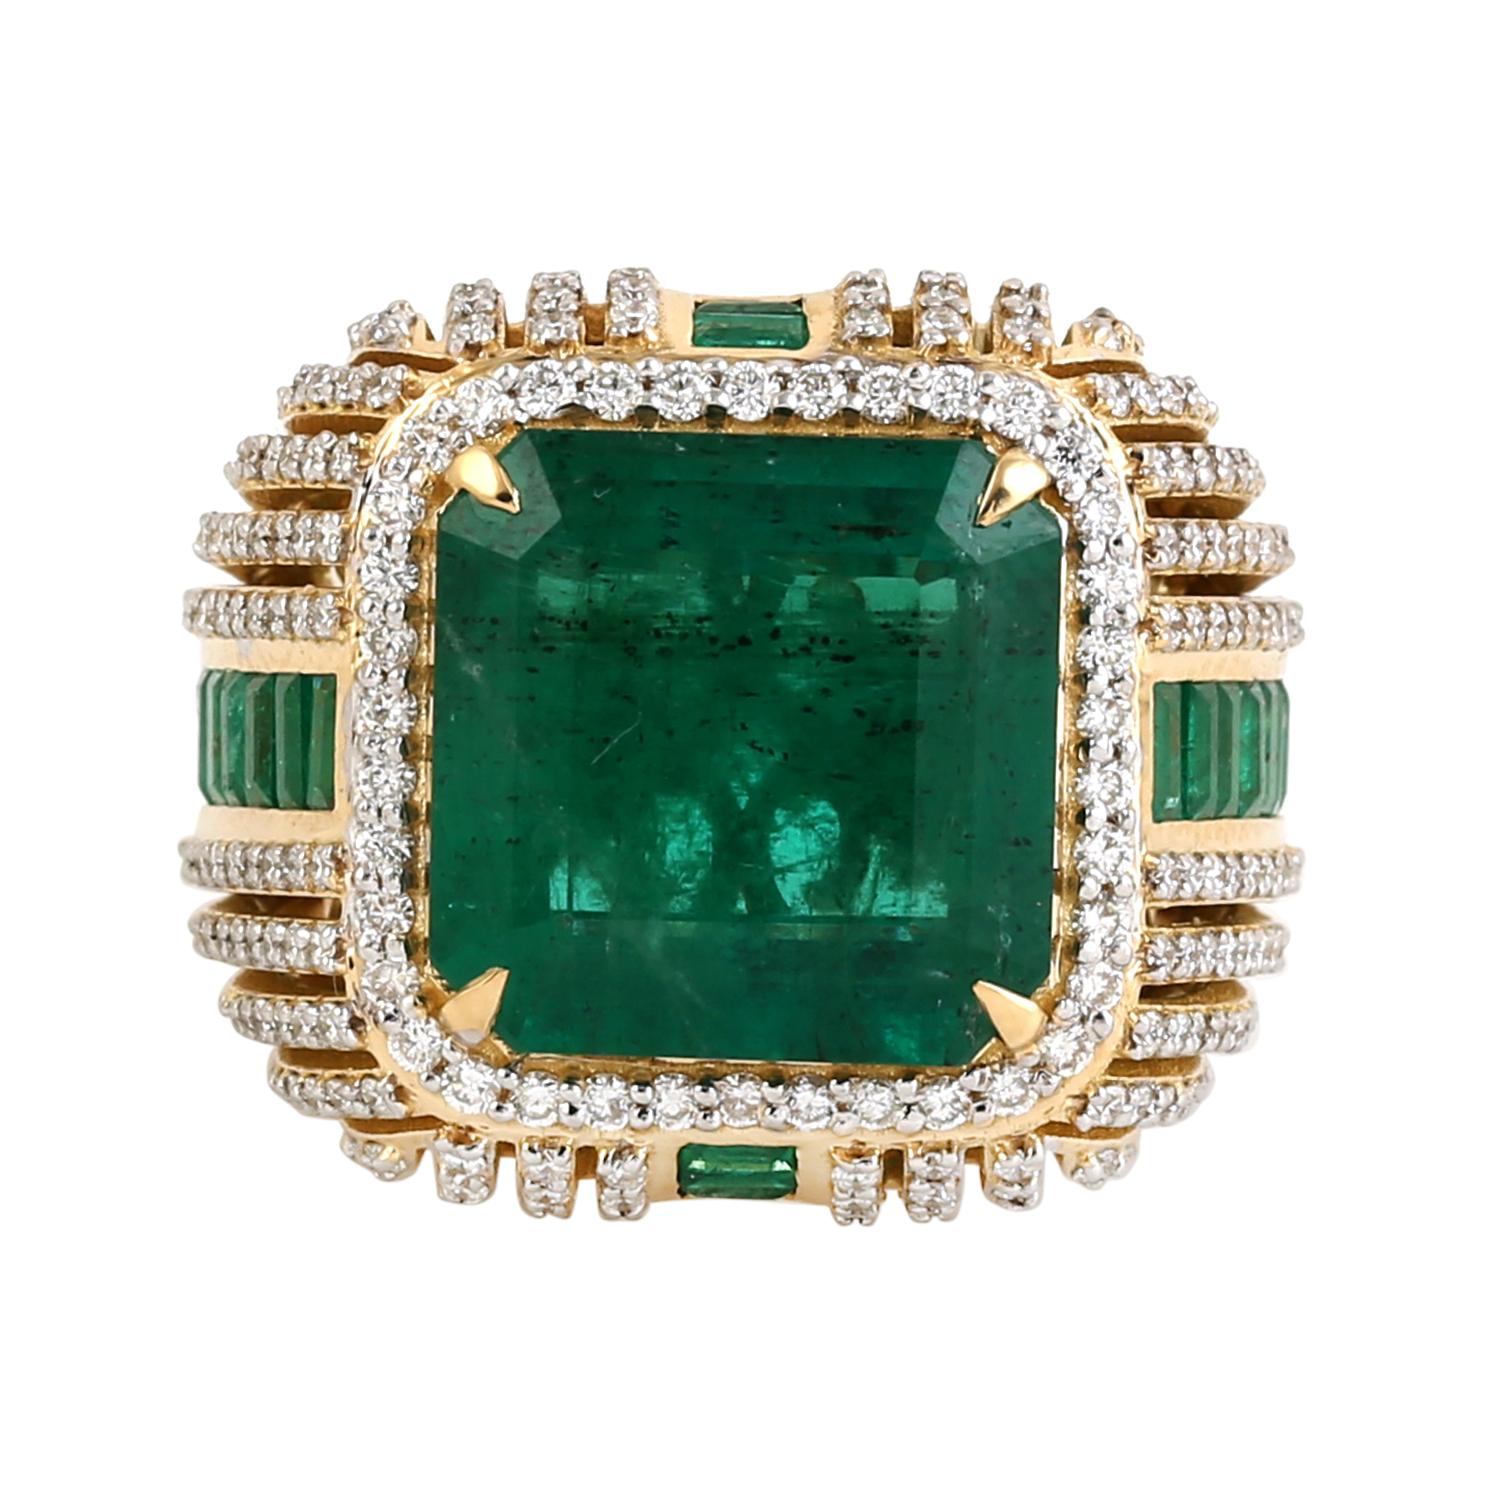 Mixed Cut Vintage Looking Zambian Emerald Cocktail Ring With Diamonds